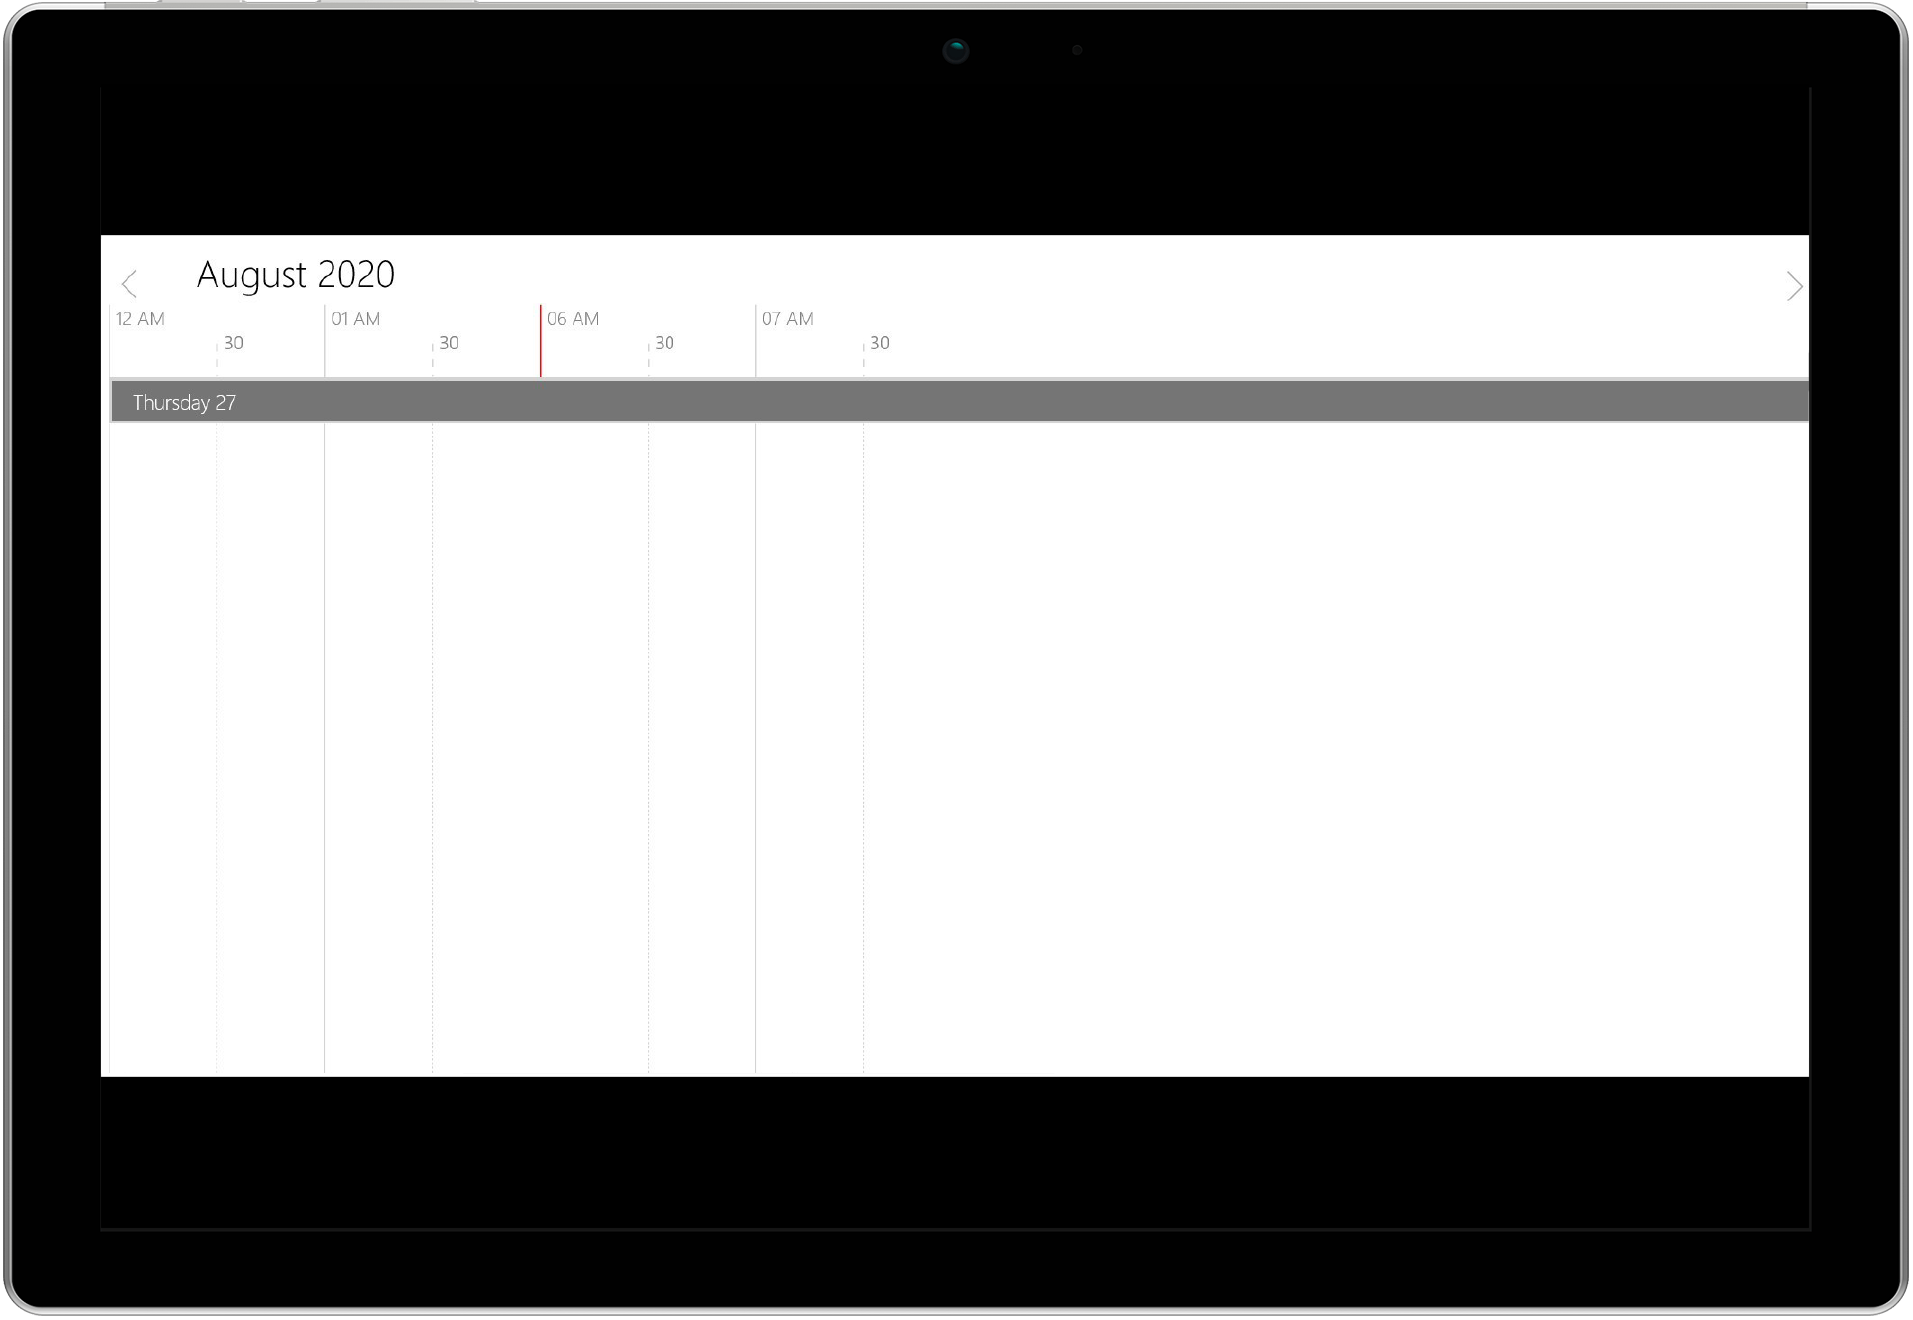 CollapsedHours UWP TimeLineView